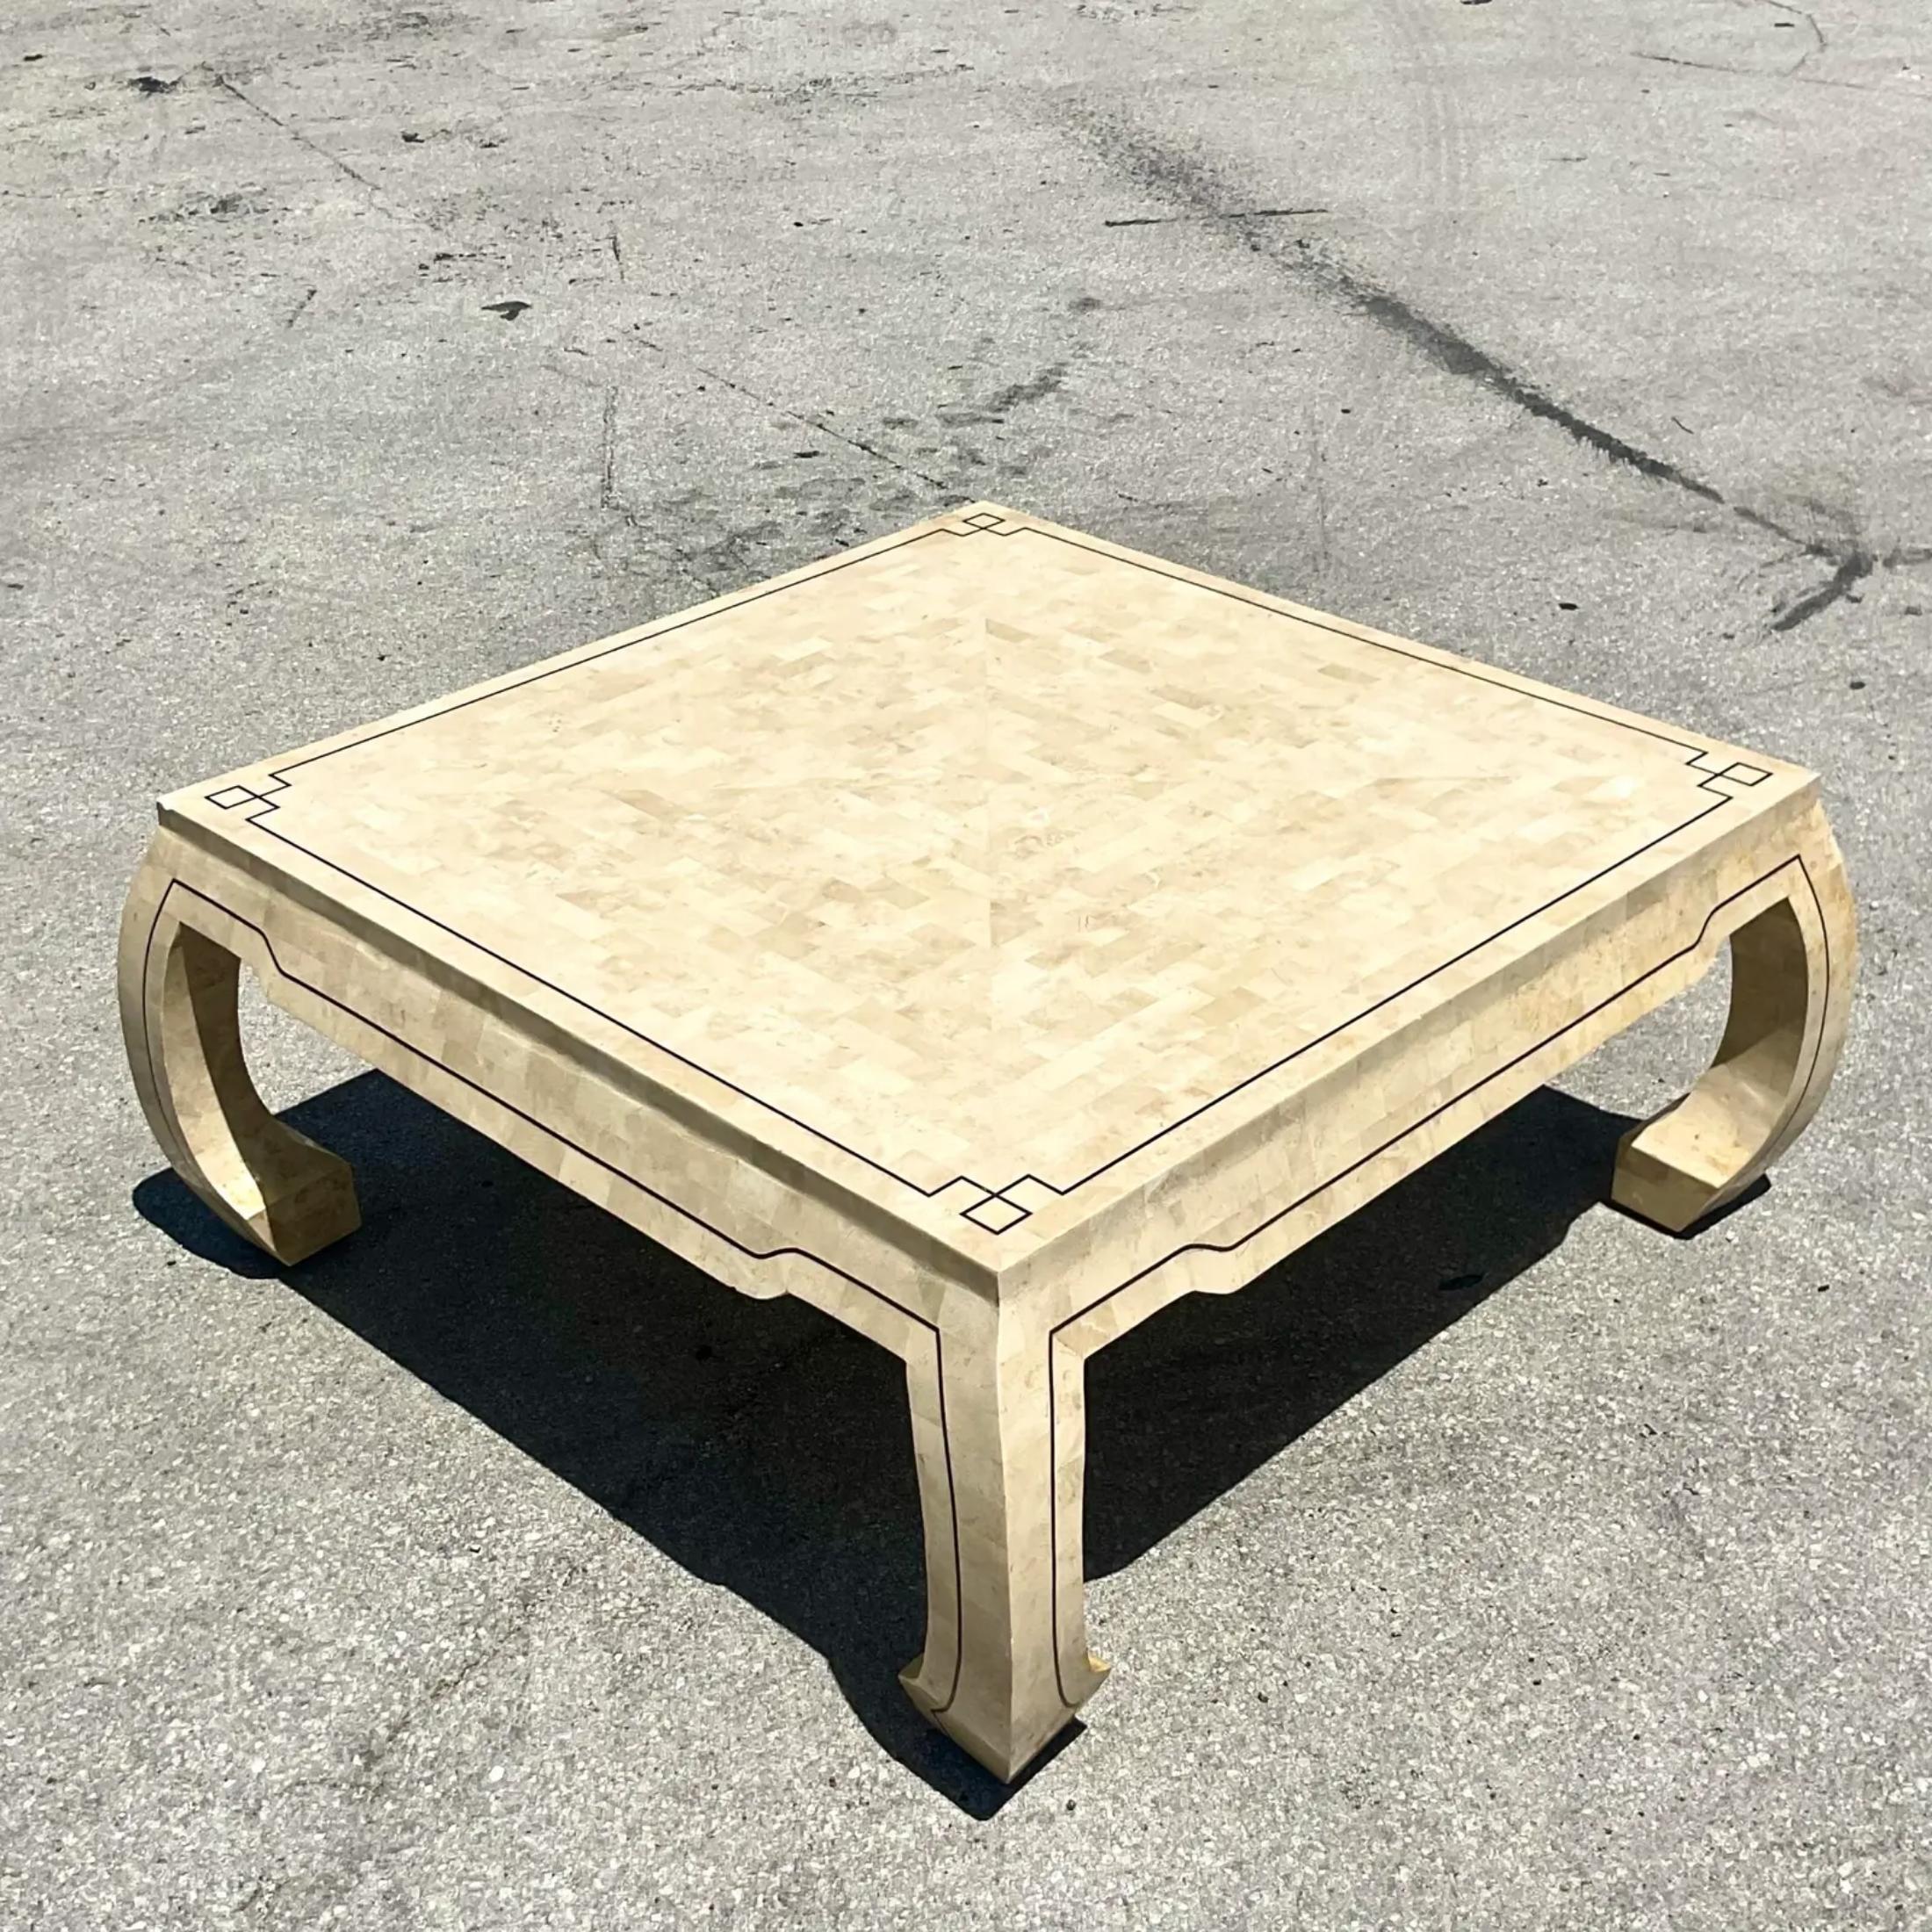 Vintage Regency Tessellated Stone Ming Coffee Table In Good Condition For Sale In west palm beach, FL